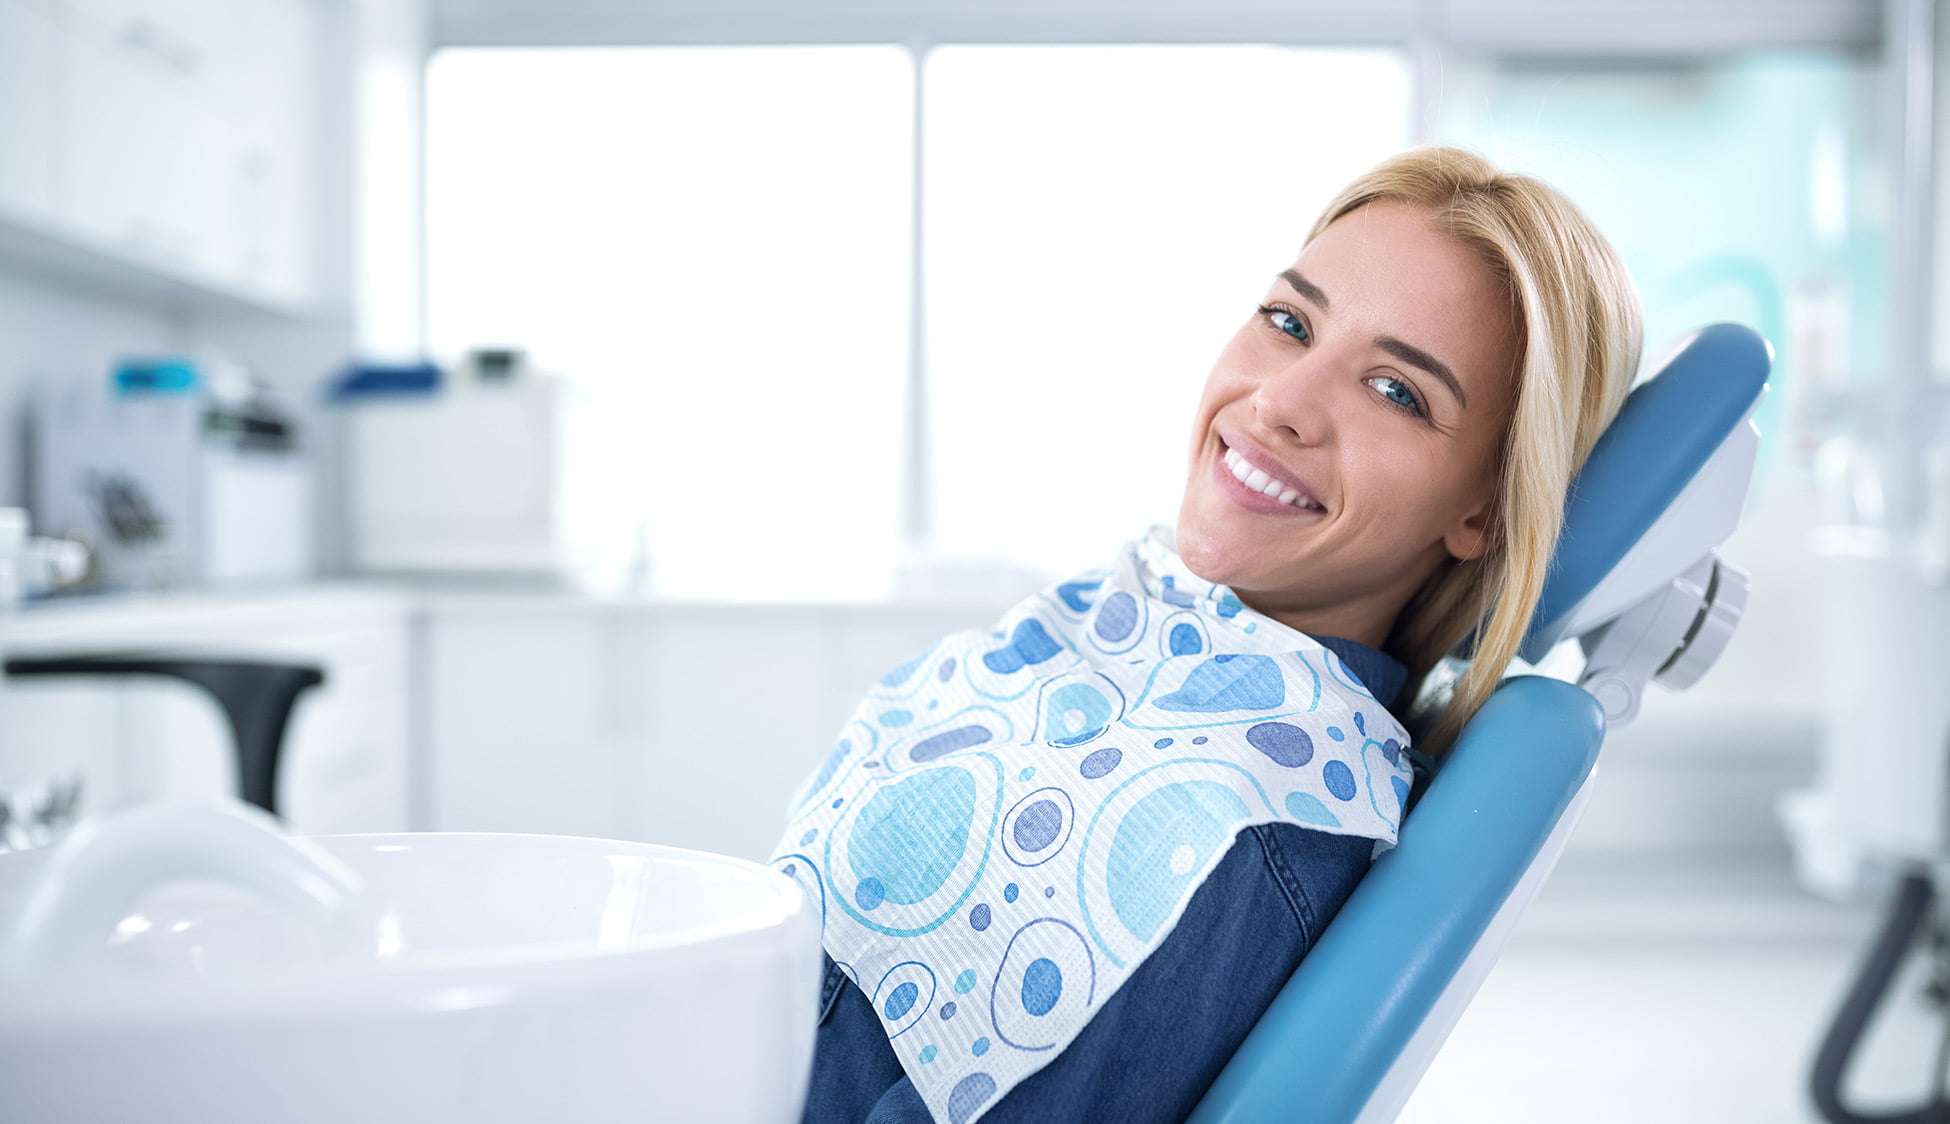 What Can I Eat After A Dental Cleaning?